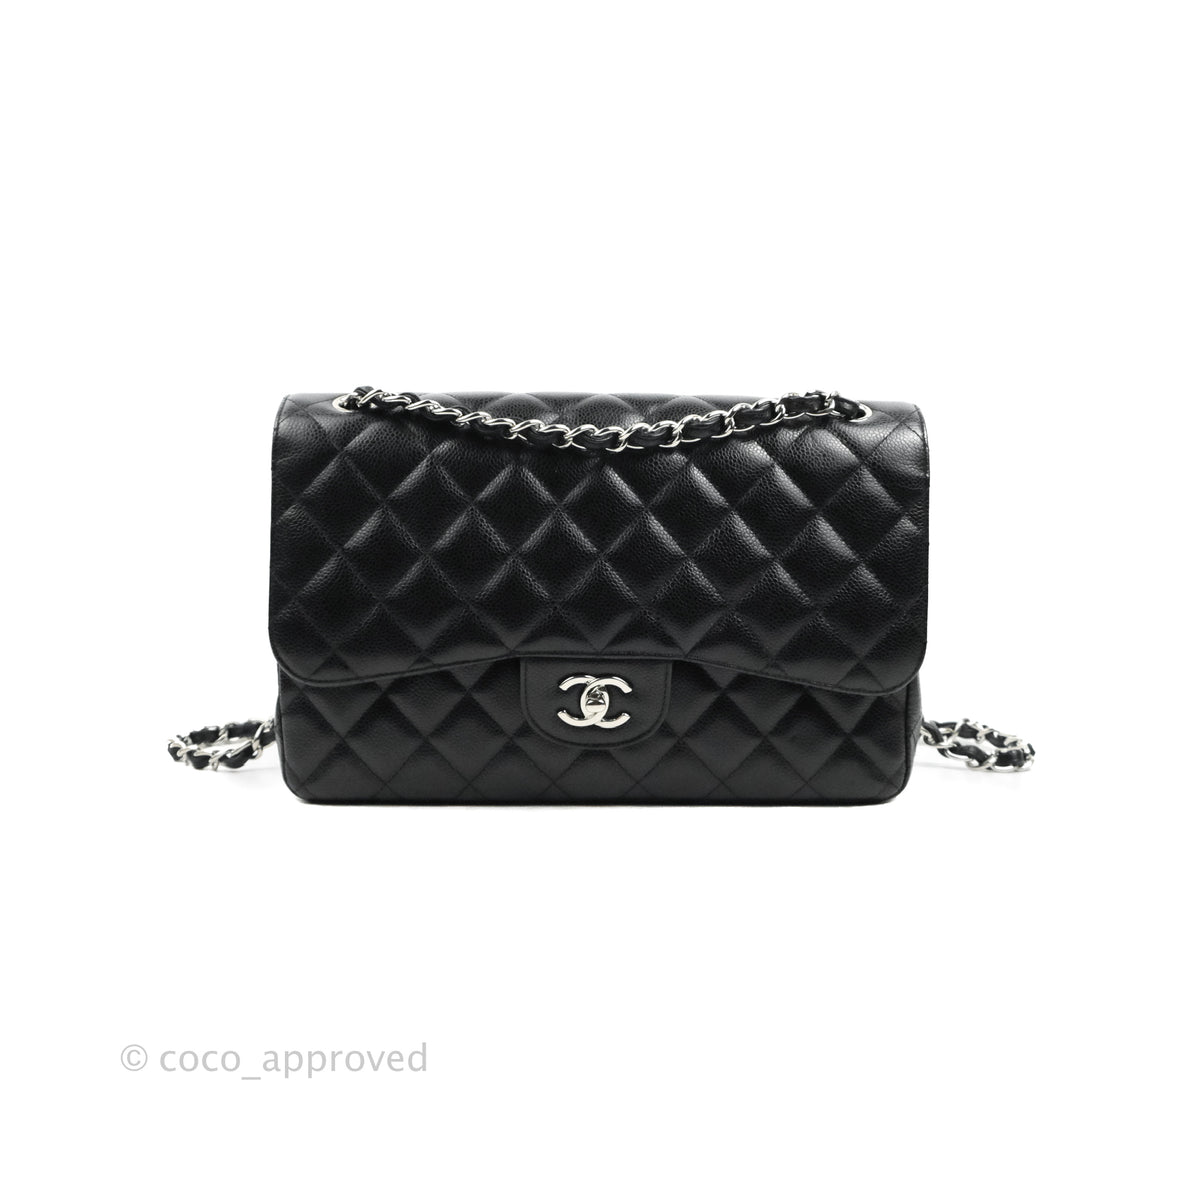 coco chanel black and white bag